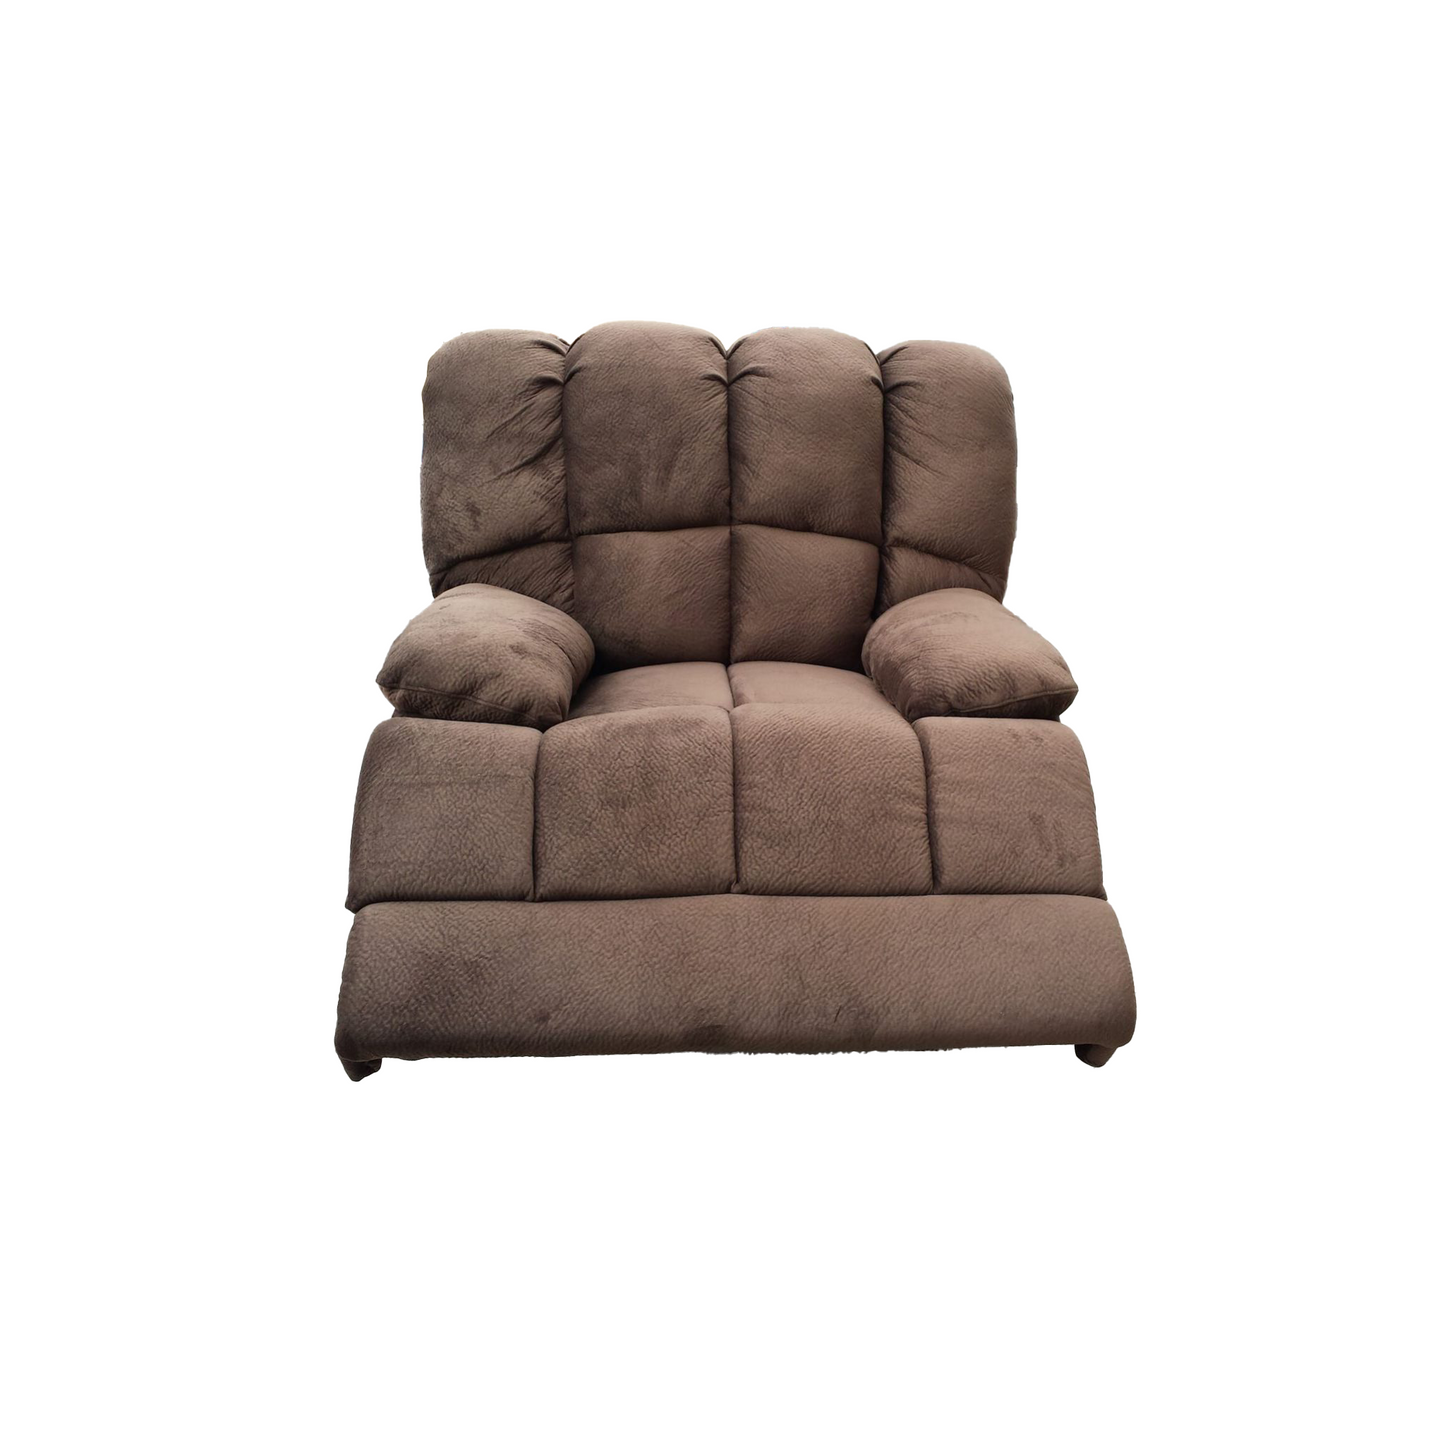 Shira Recliner Lounge Suite